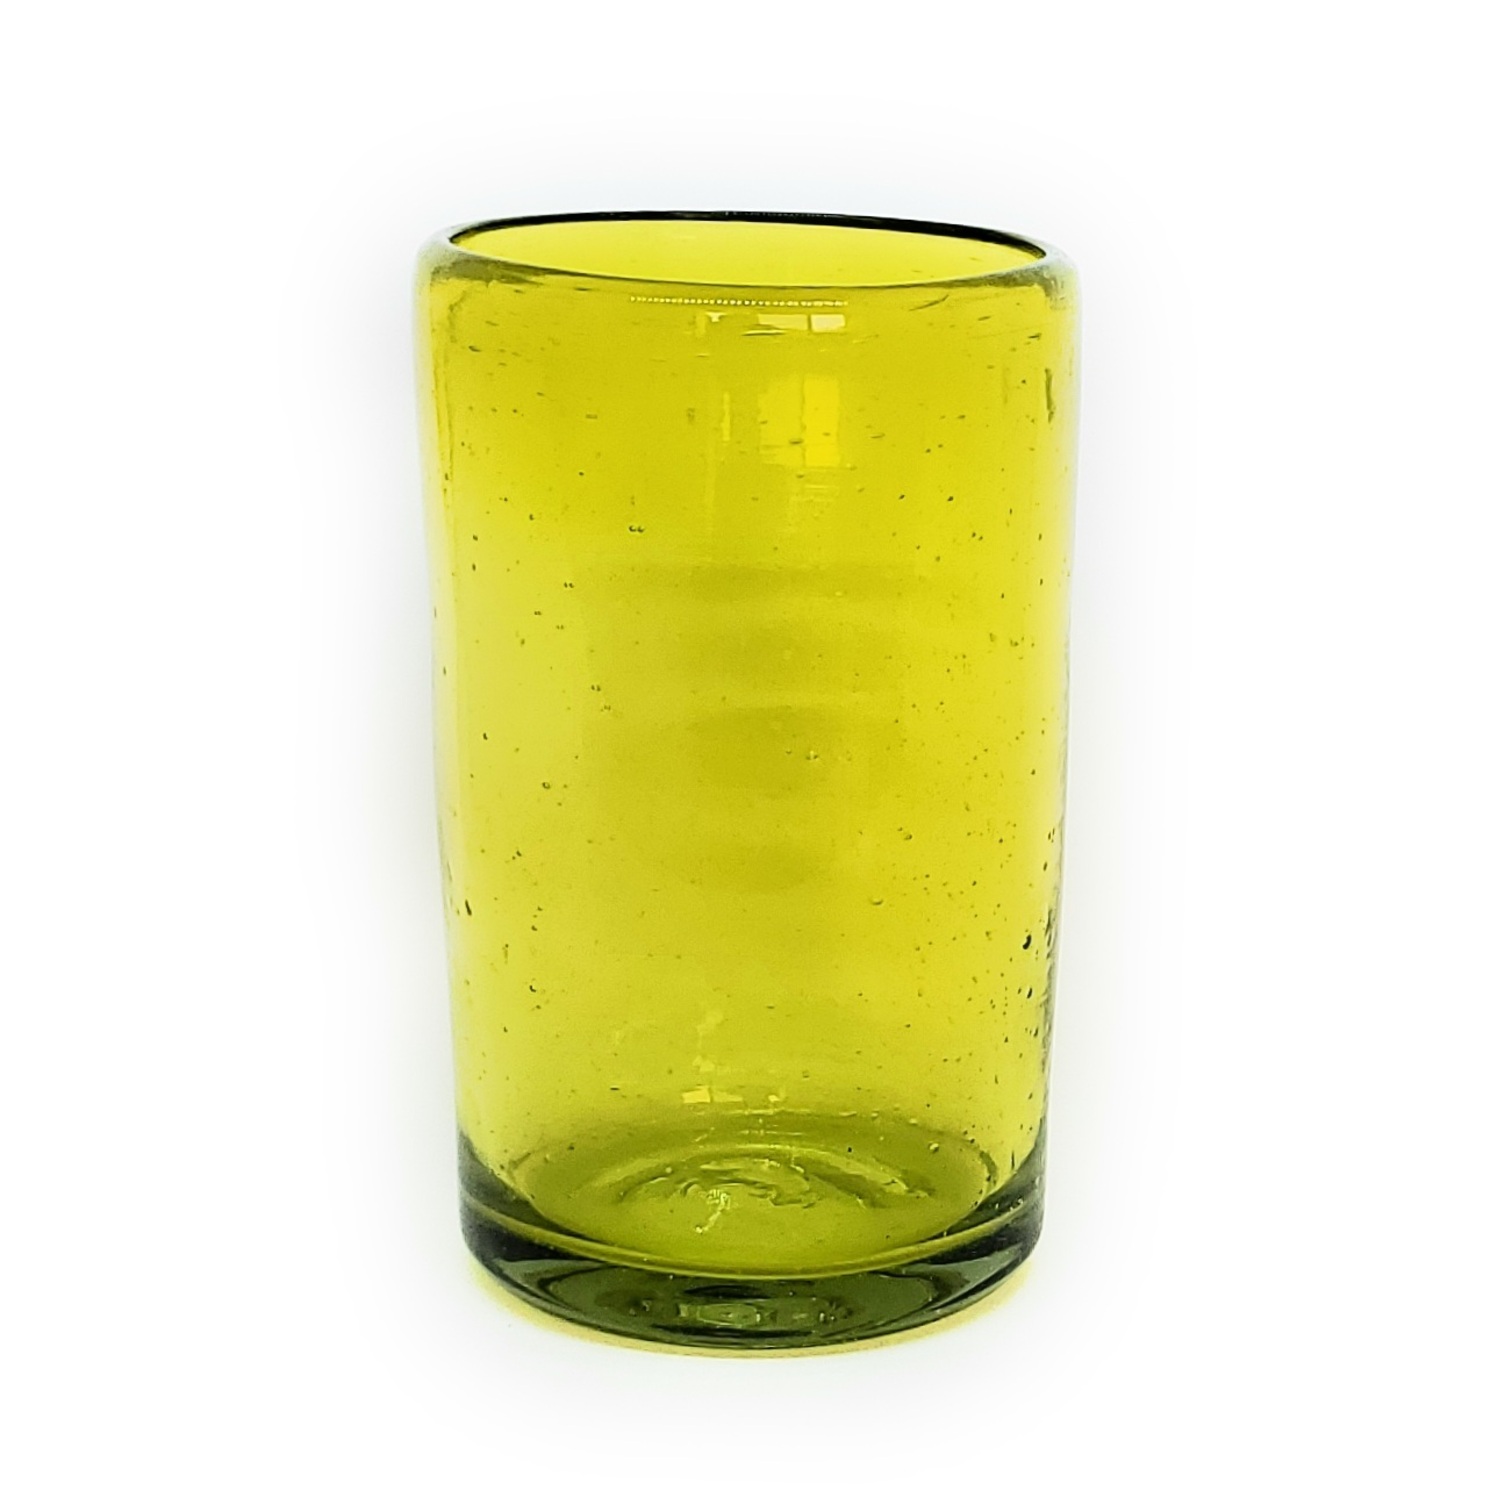 New Items / Solid Yellow 14 oz Drinking Glasses (set of 6) / These handcrafted glasses deliver a classic touch to your favorite drink.